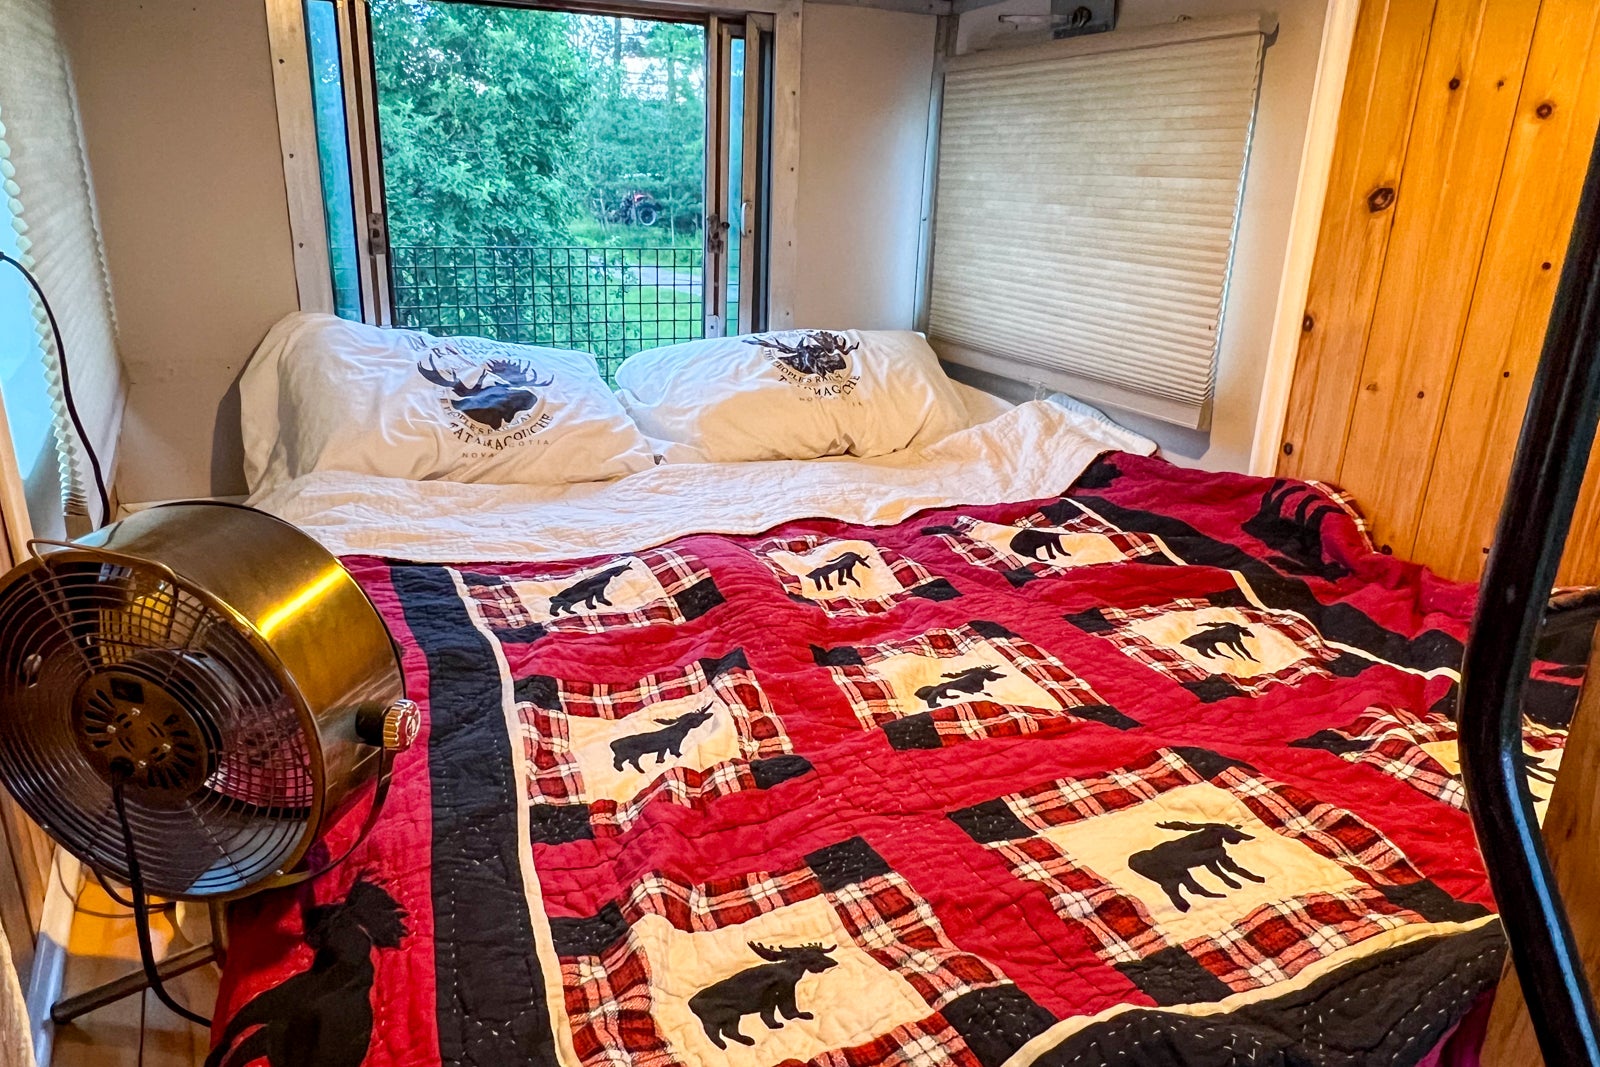 The bed in the cupola of Caboose #8 at the Train Station Inn in Tatamagouche, Nova Scotia